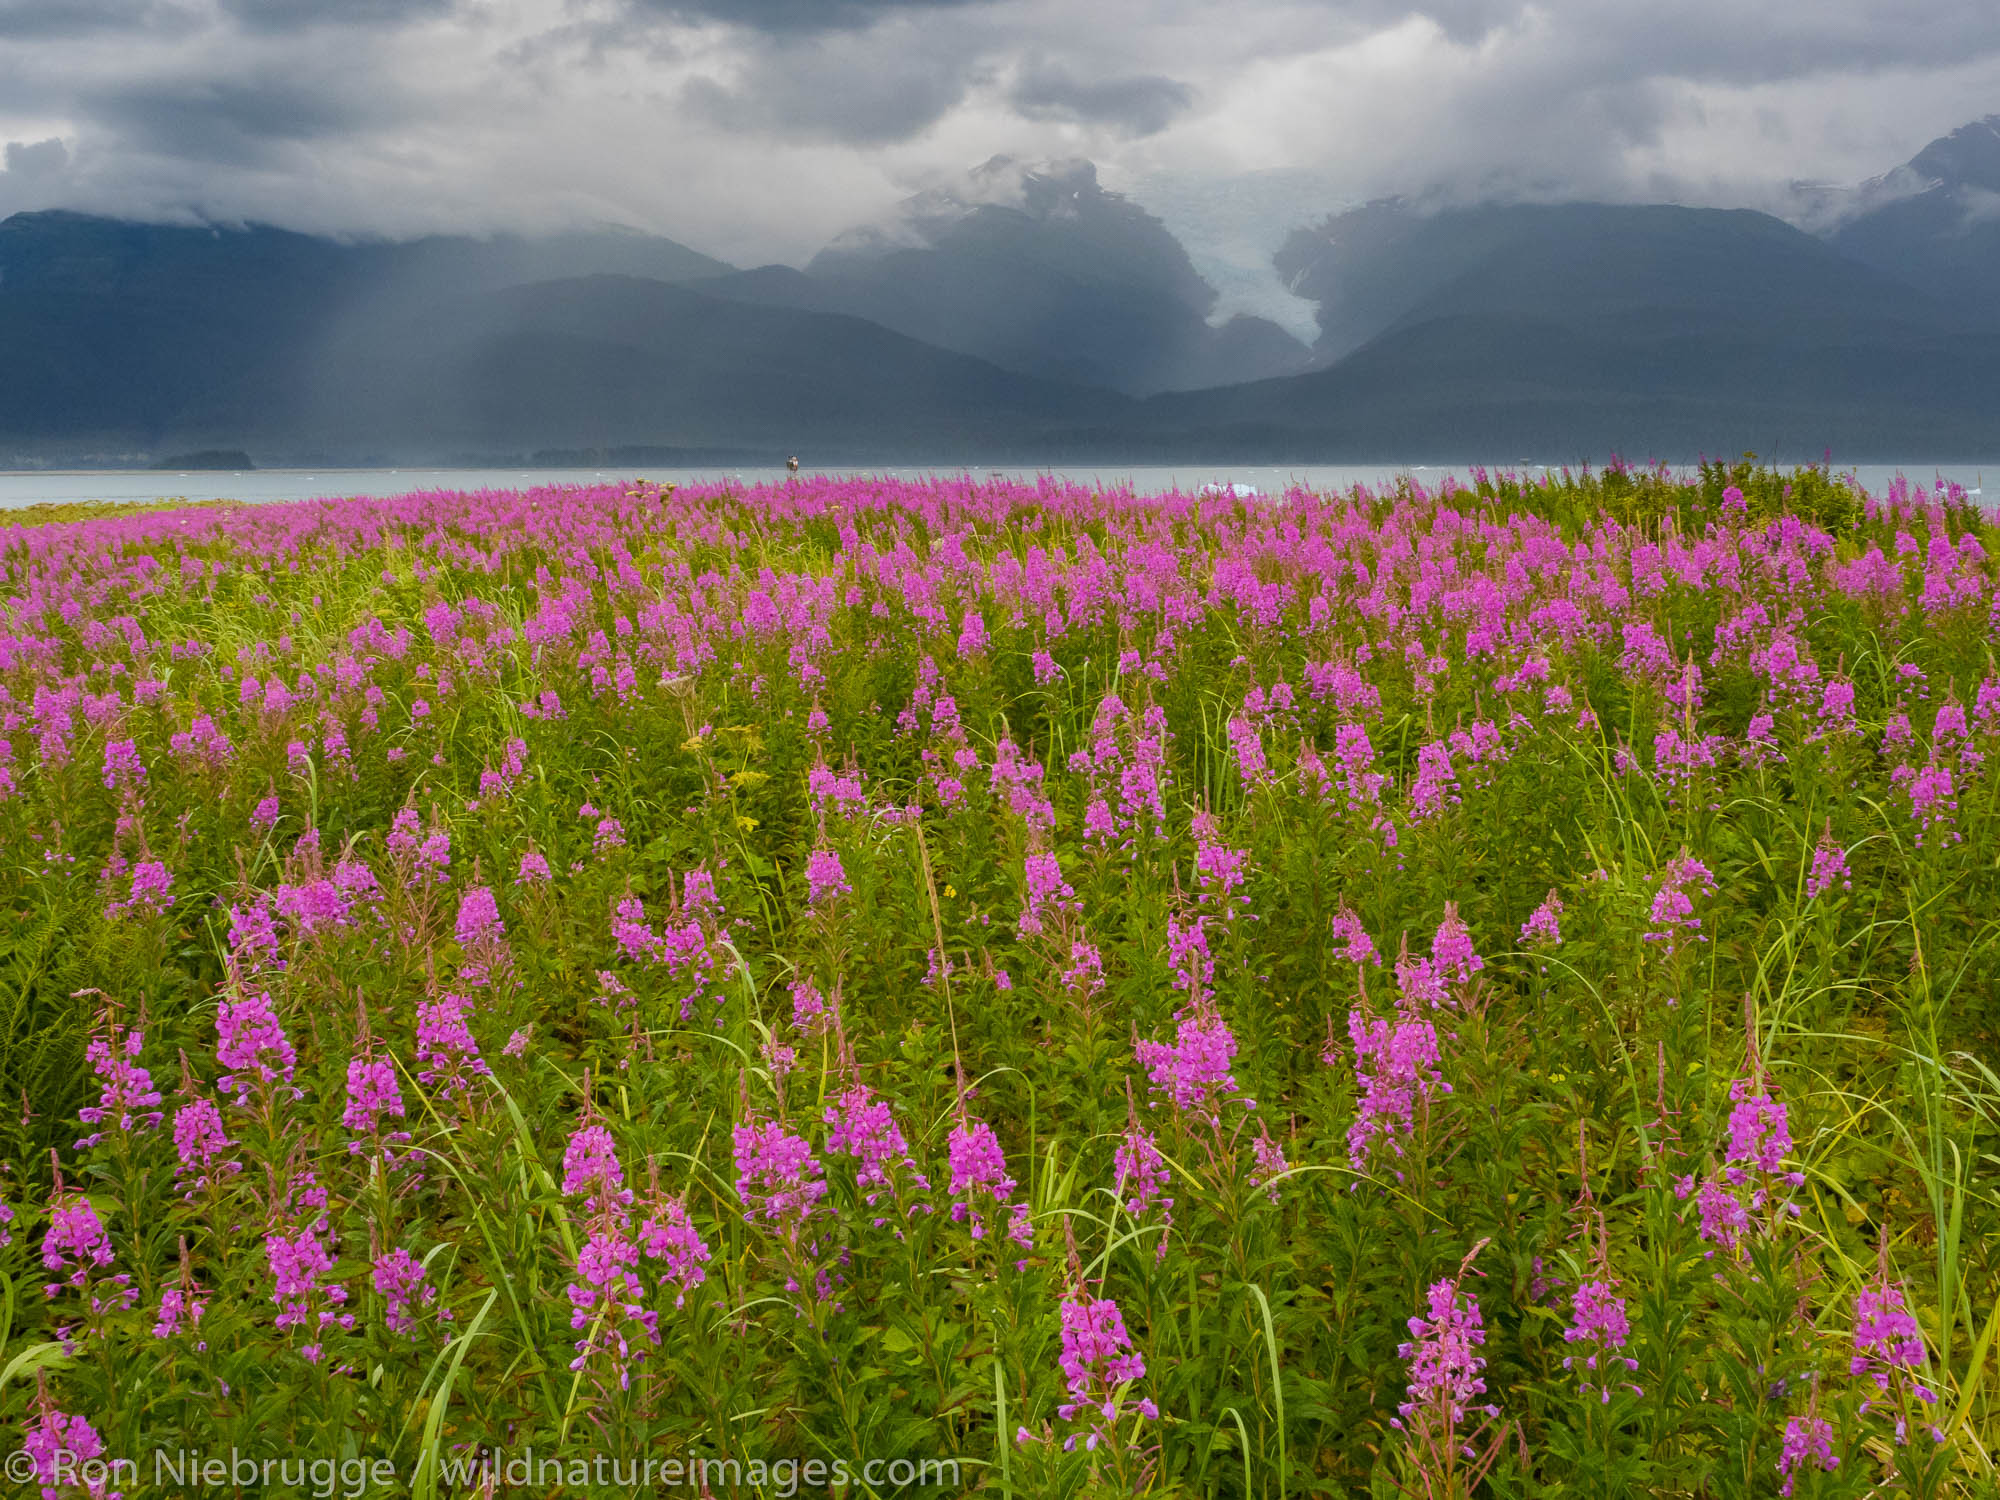 Fireweed field, Tracy Arm, Tongass National Forest, Alaska.